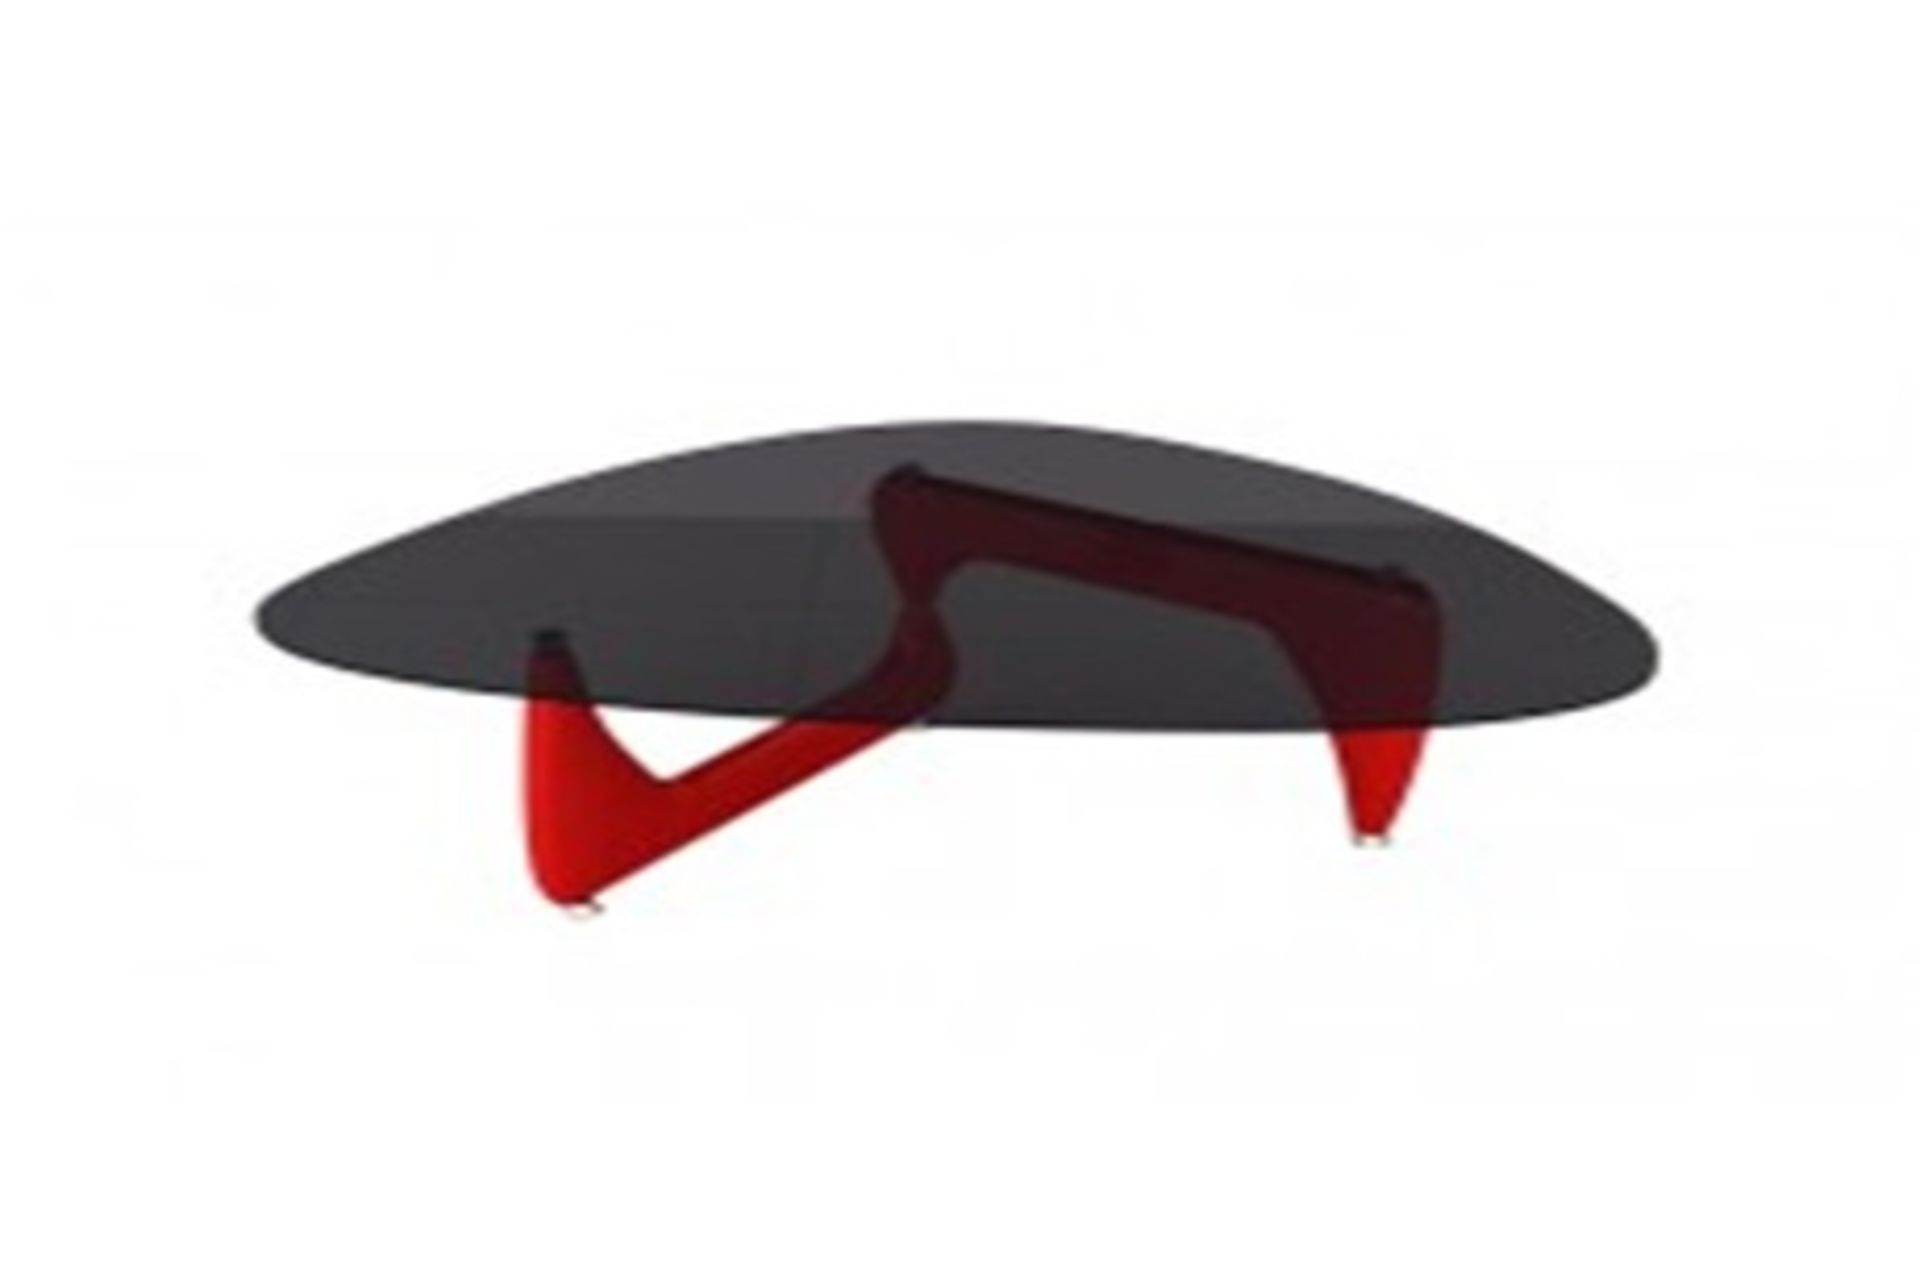 1 x Isamu Noguchi Inspired Black Glass Coffee Table with Red Gloss Legs CTB425/RED (Brand New &